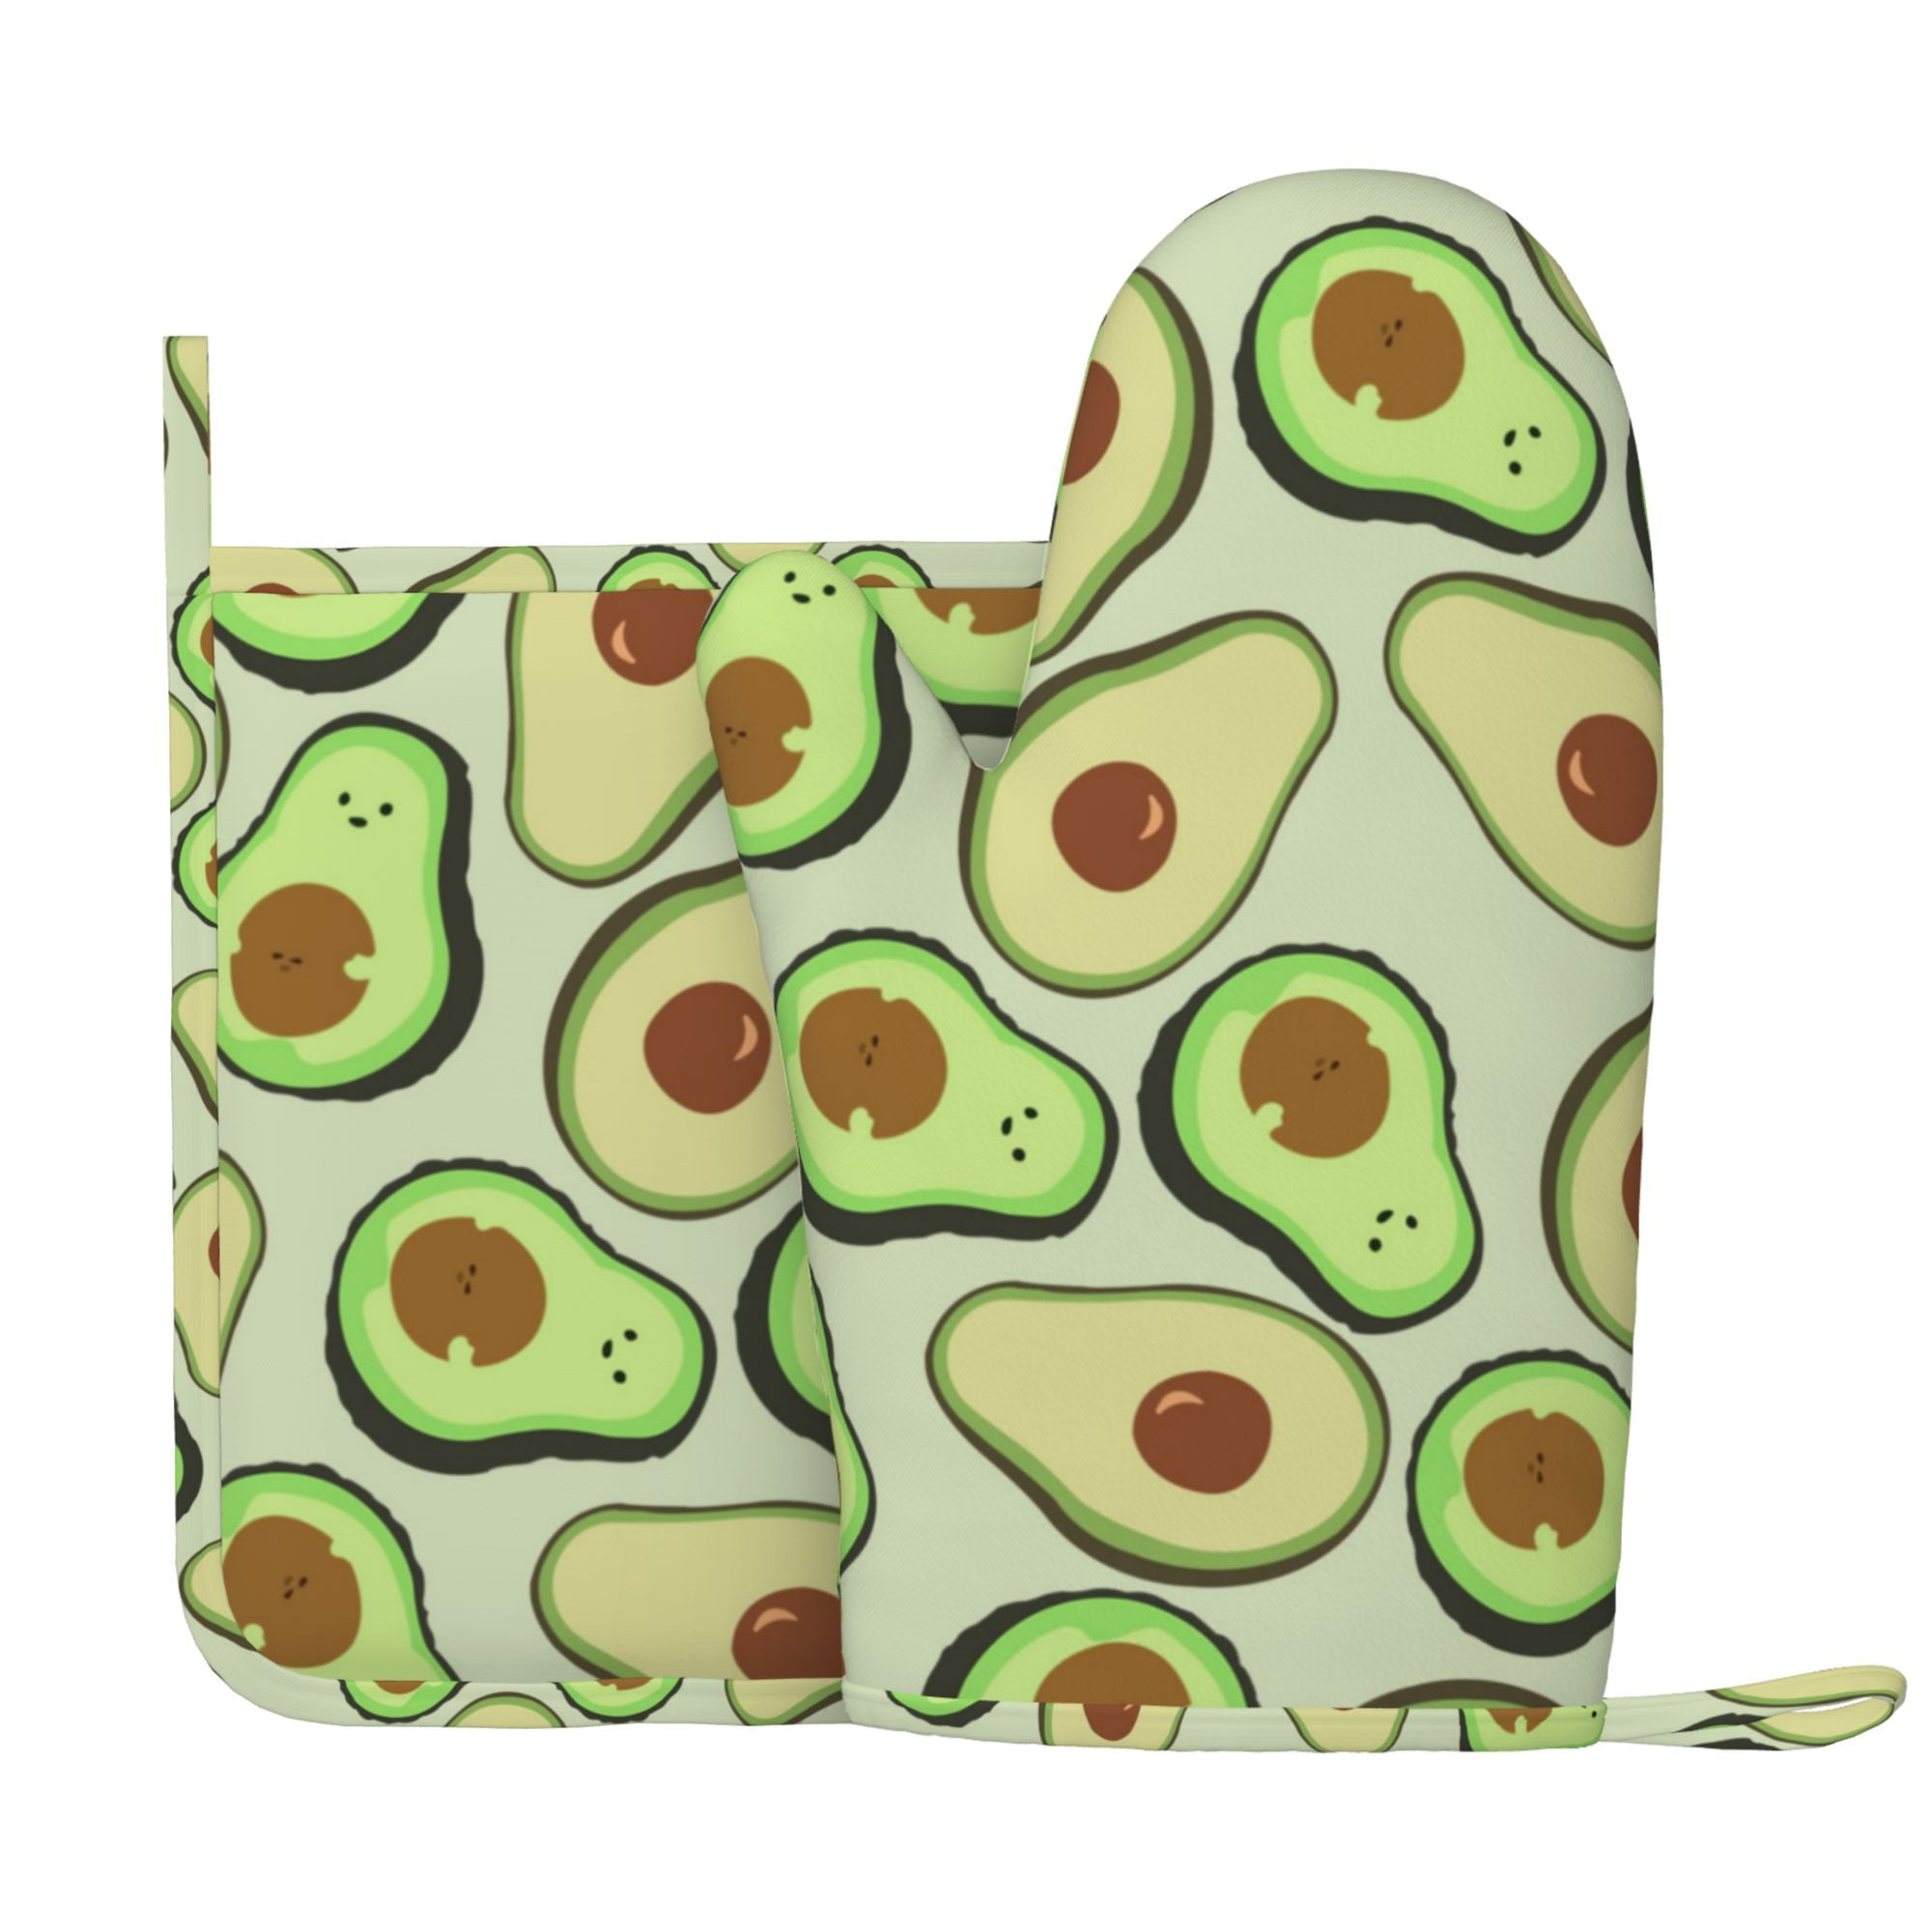 Let's Get Toasted Oven Mitt Funny Brunch Breakfast Bacon Avocado Toast Cute  Kitchen Glove (Oven Mitts)